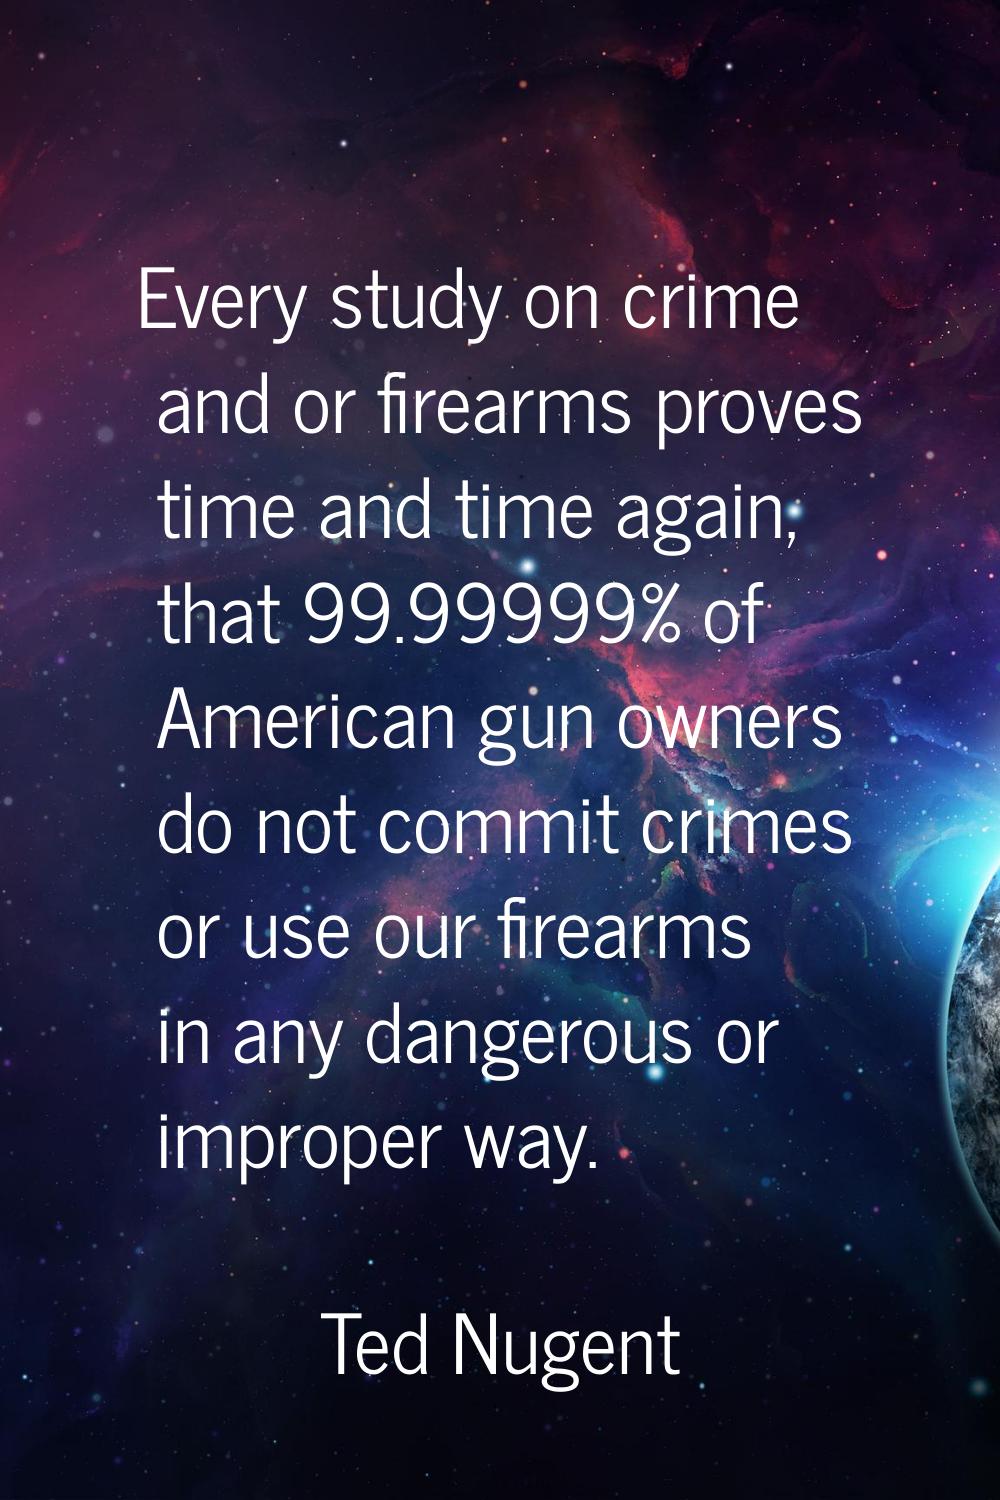 Every study on crime and or firearms proves time and time again, that 99.99999% of American gun own